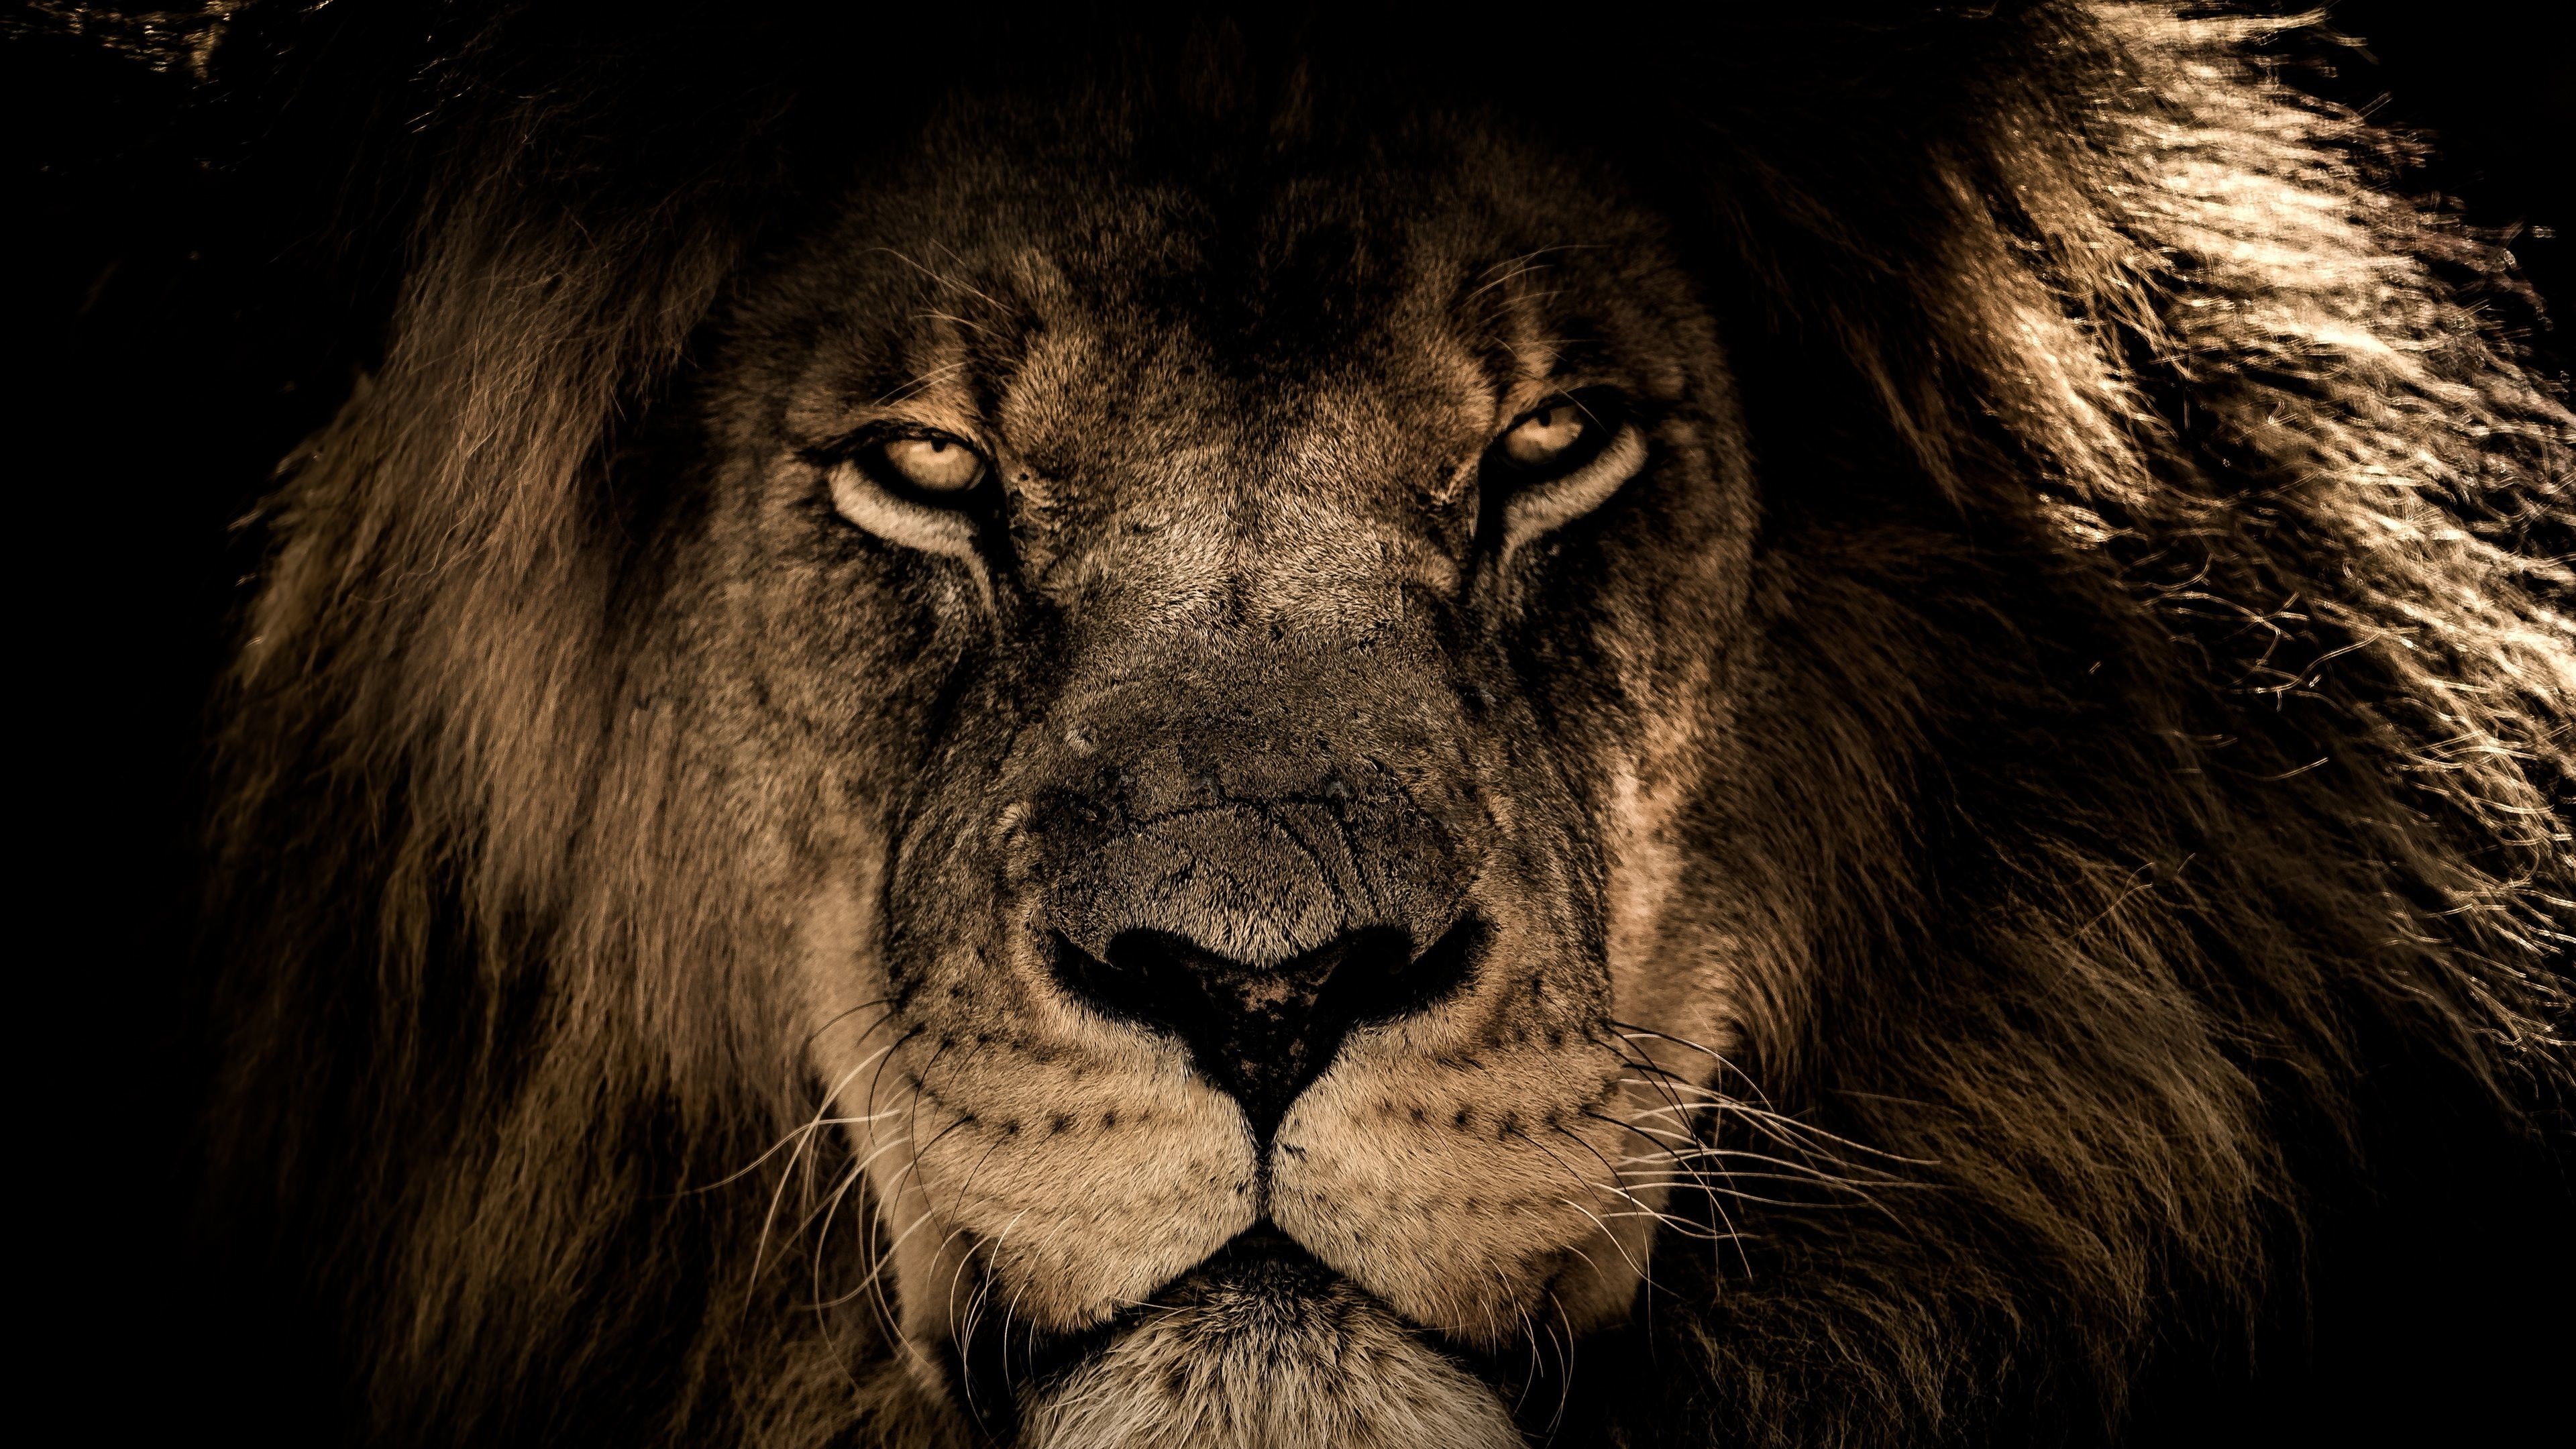 Lion Face Wallpaper (best Lion Face Wallpaper and image) on WallpaperChat